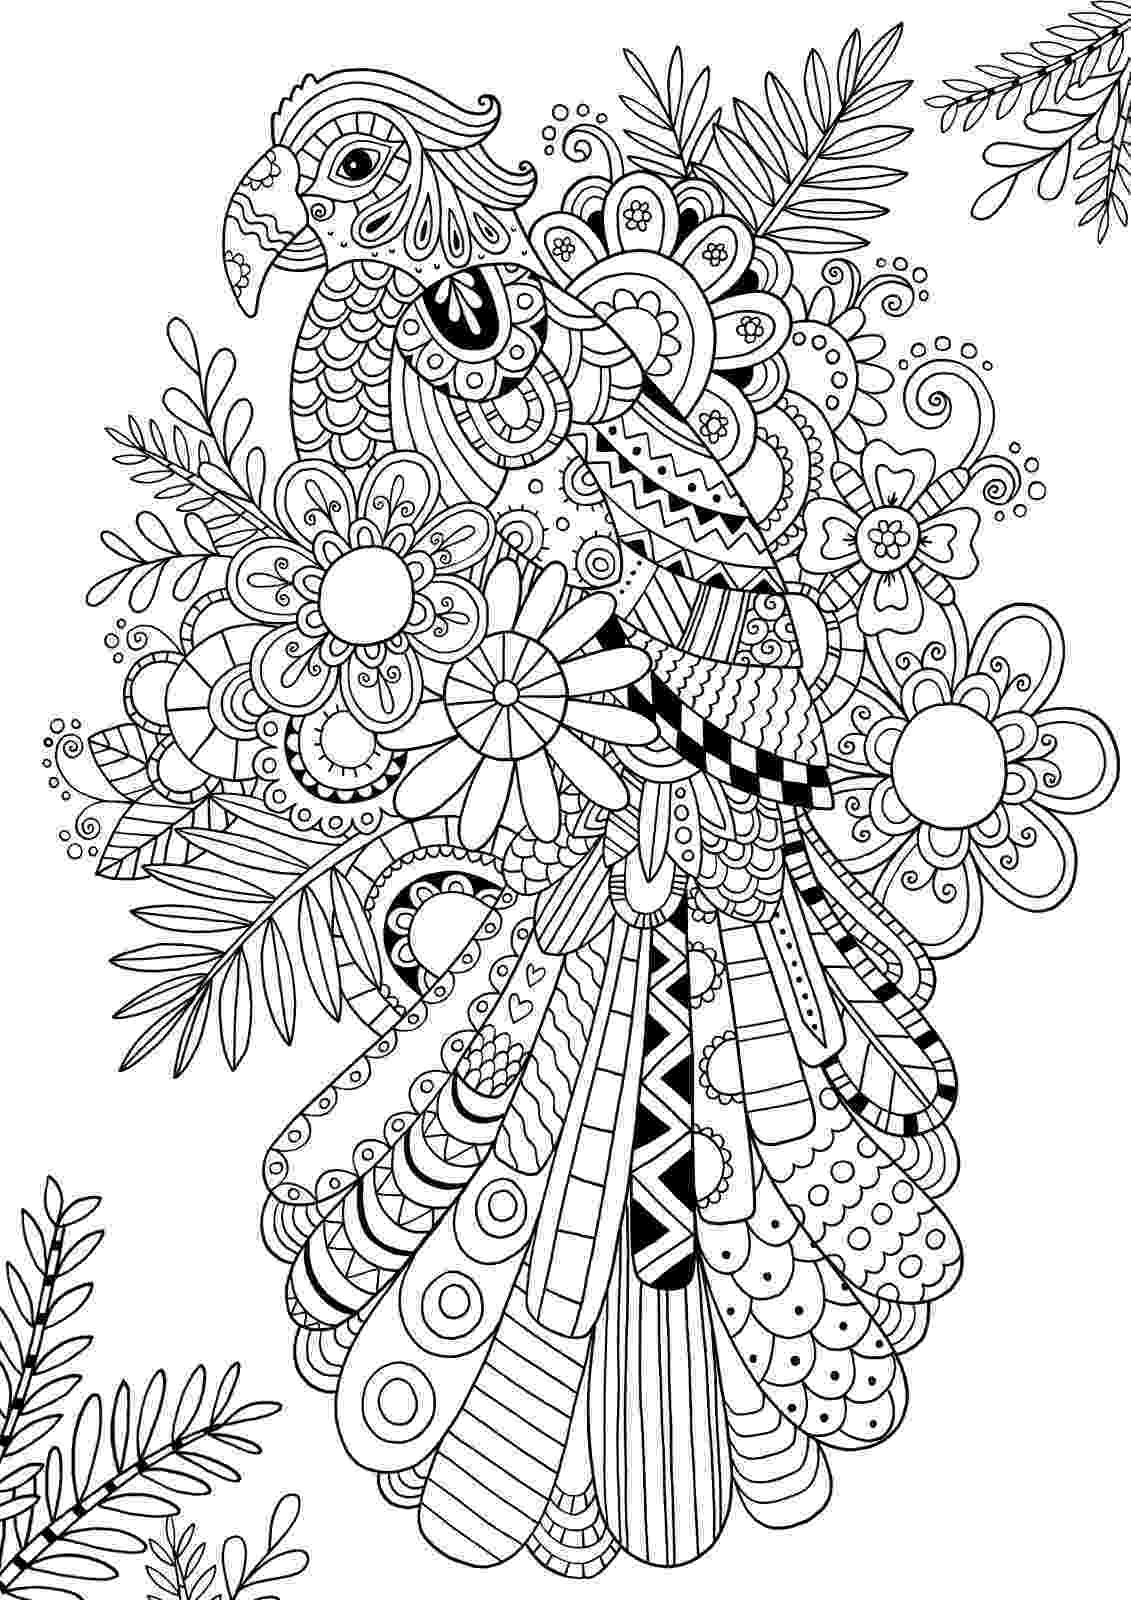 color zentangle image from httpbloghobbycraftcoukwp contentuploads zentangle color 